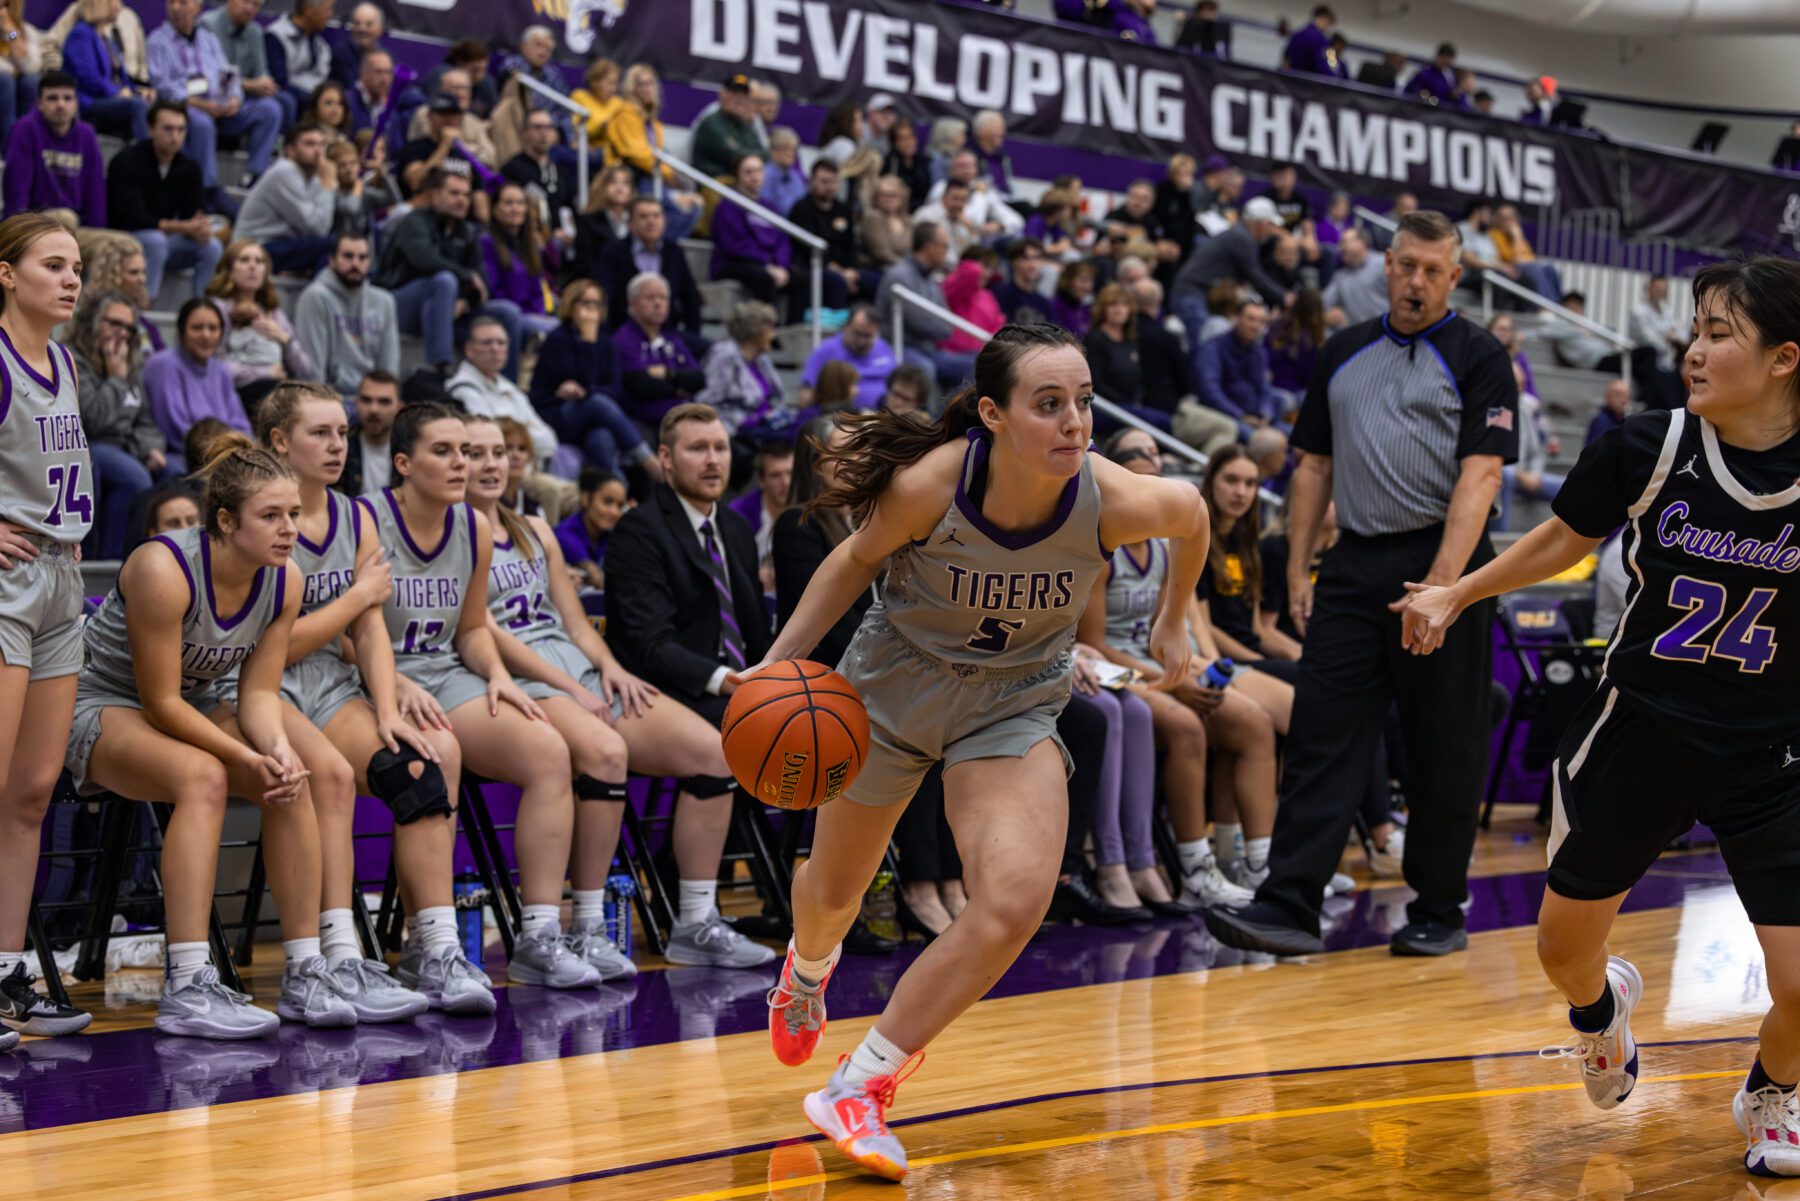 Olivet Women's Basketball player drives in with crowd watching behind her.